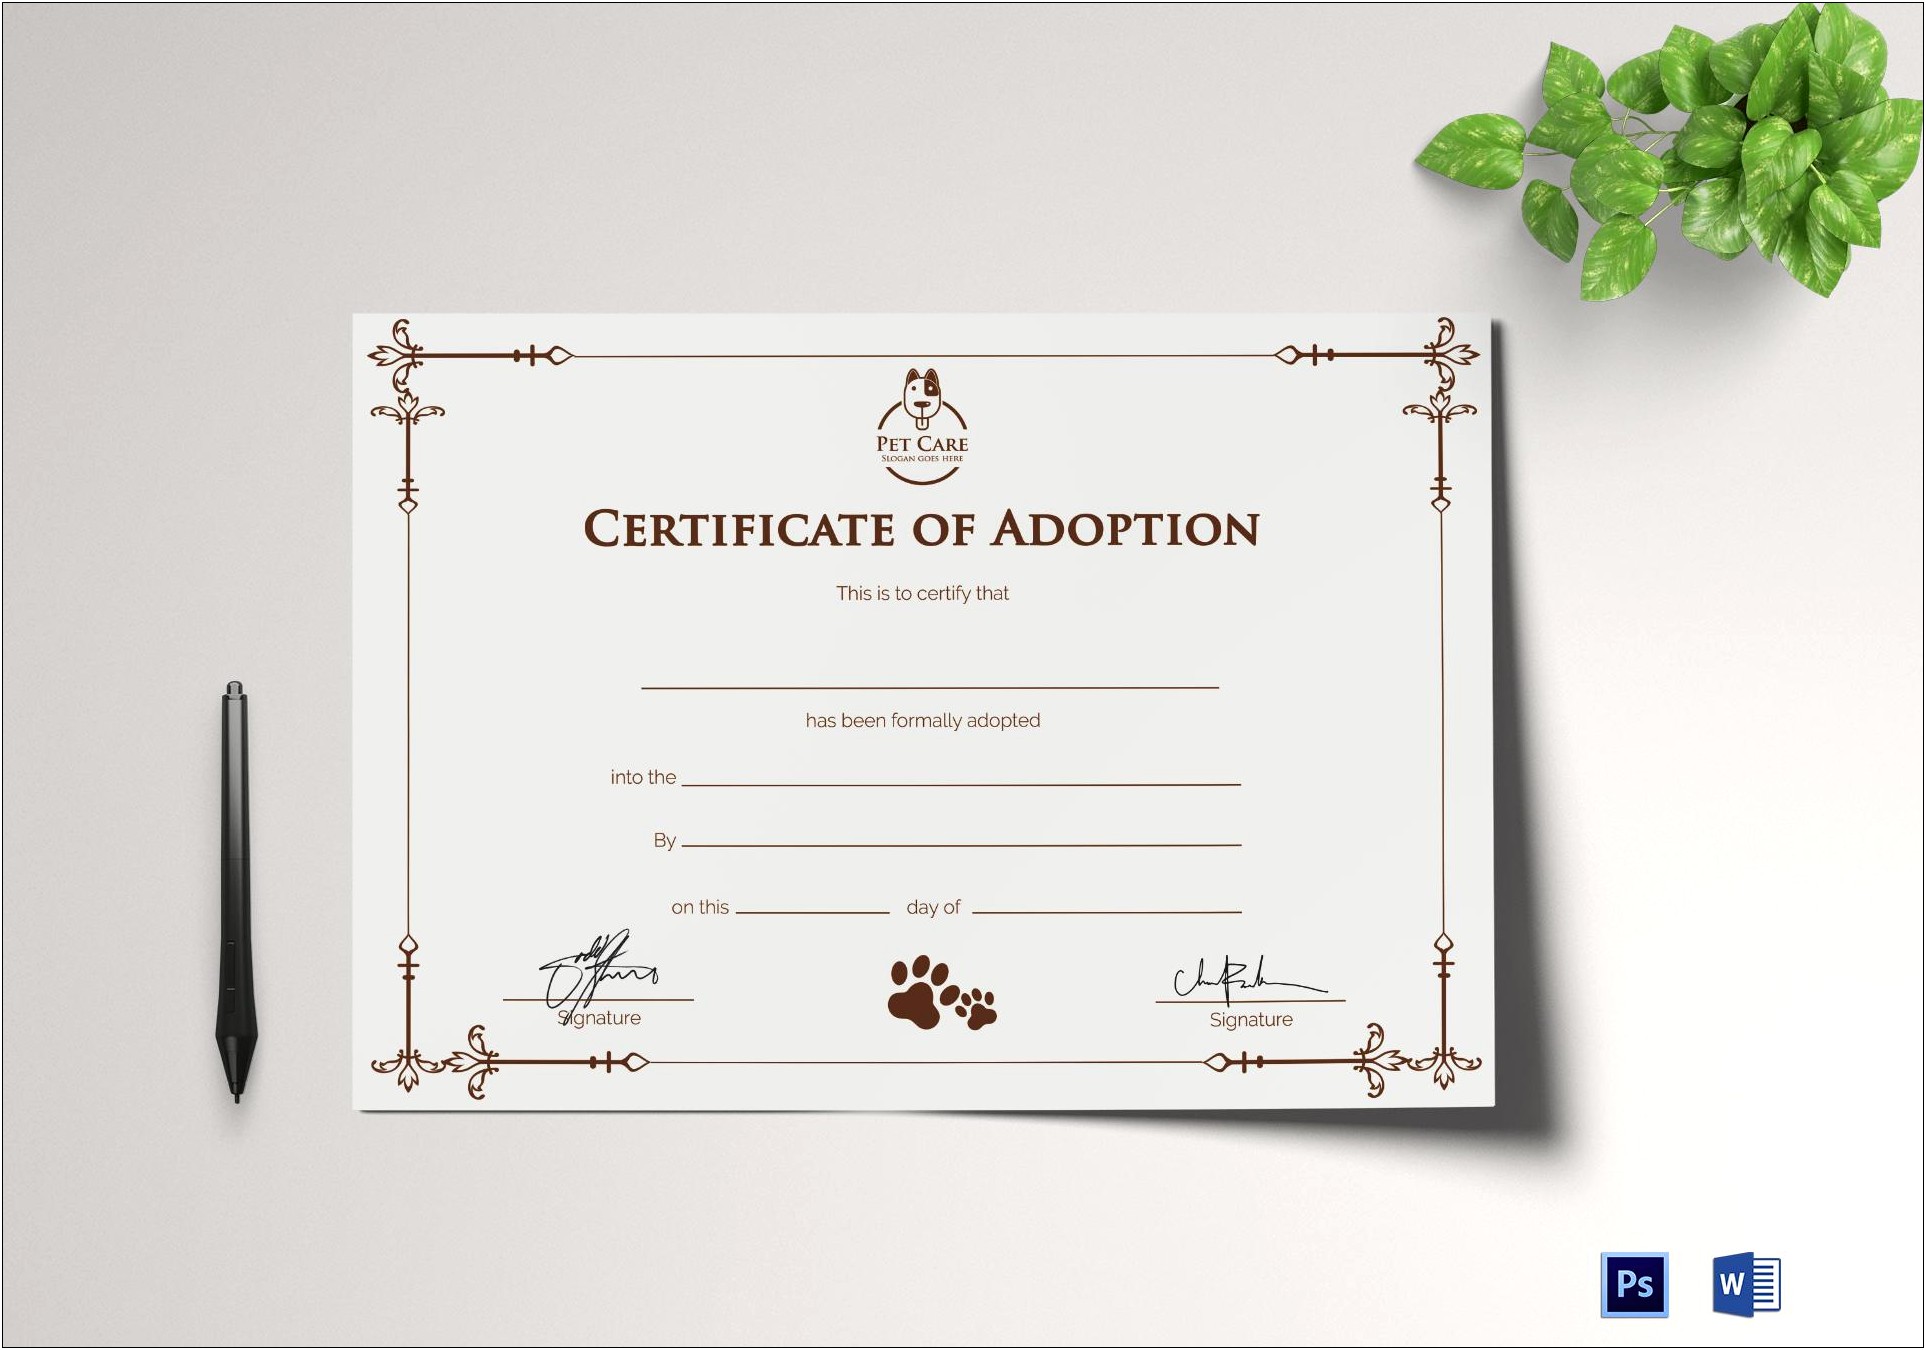 Free Downloadable Template For Kitten Adoption Certificate